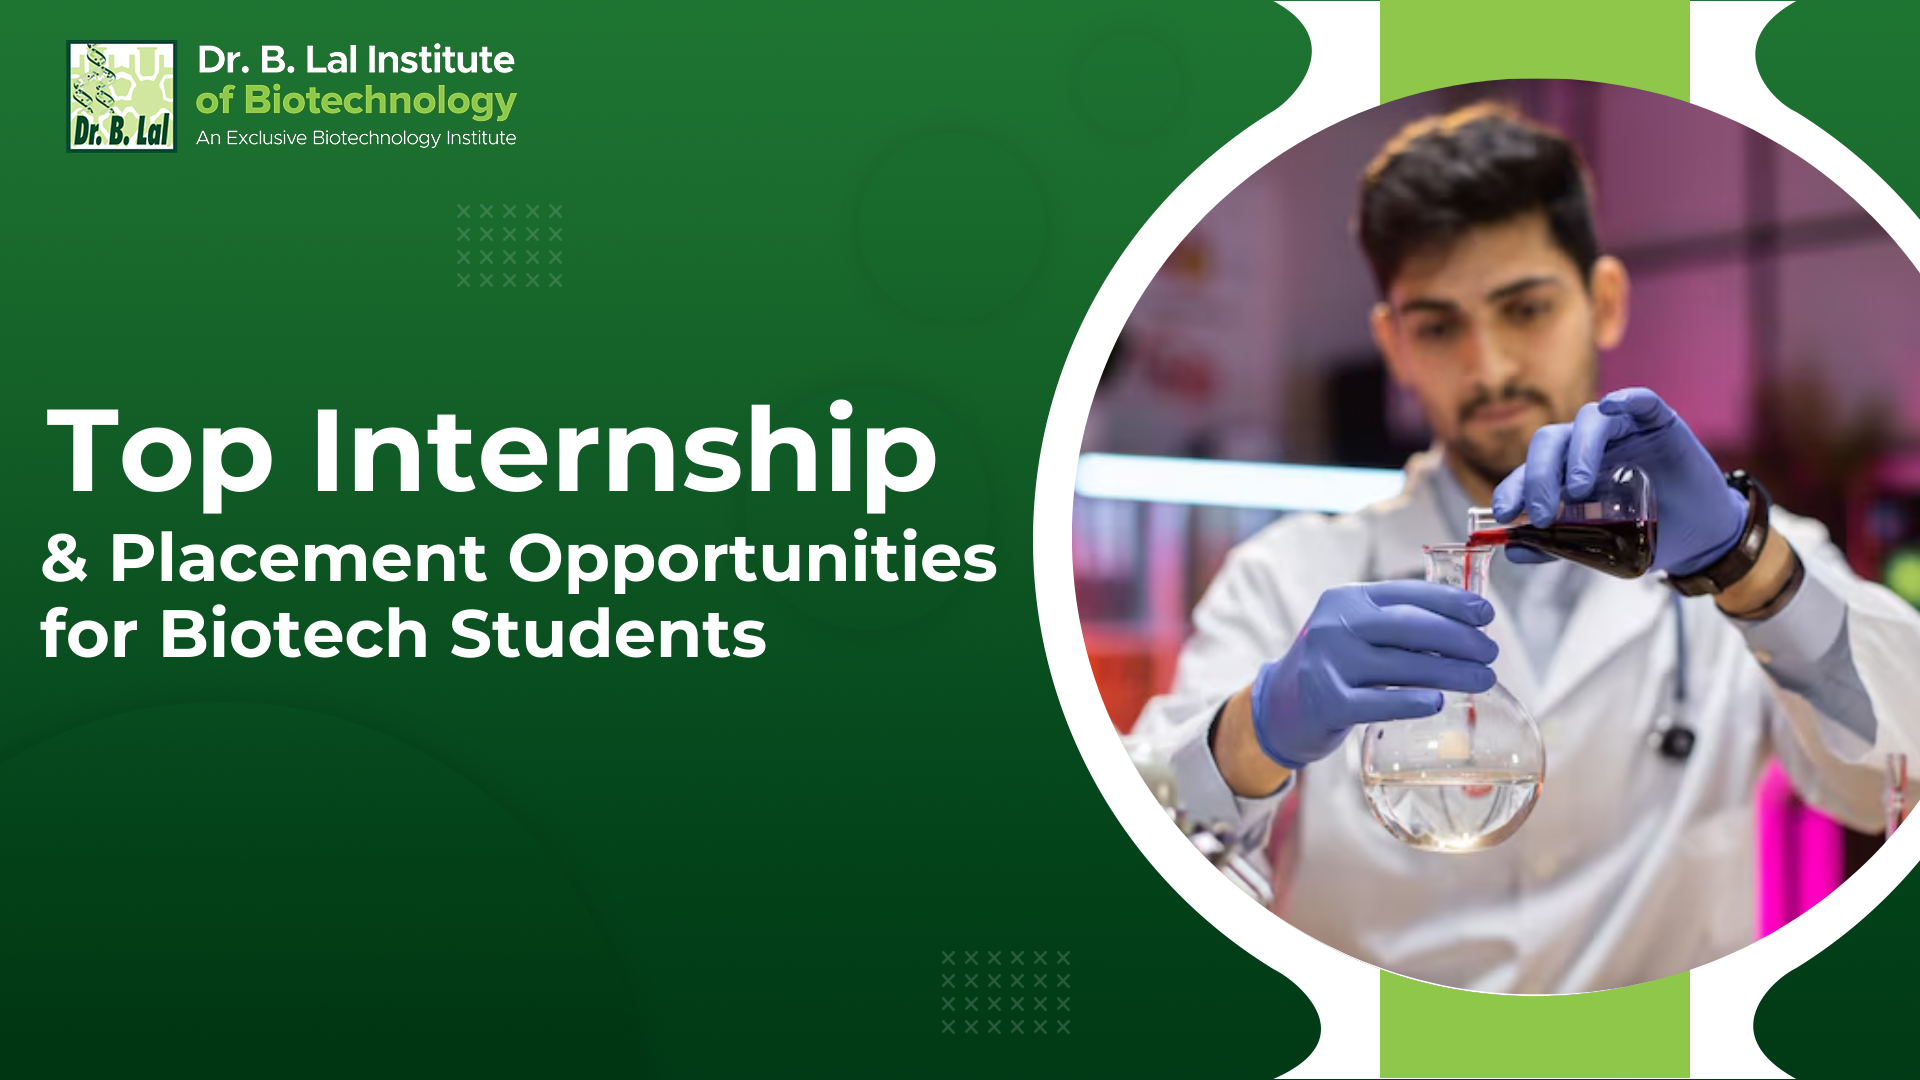 Top Internship & Placement Opportunities for Biotech Students